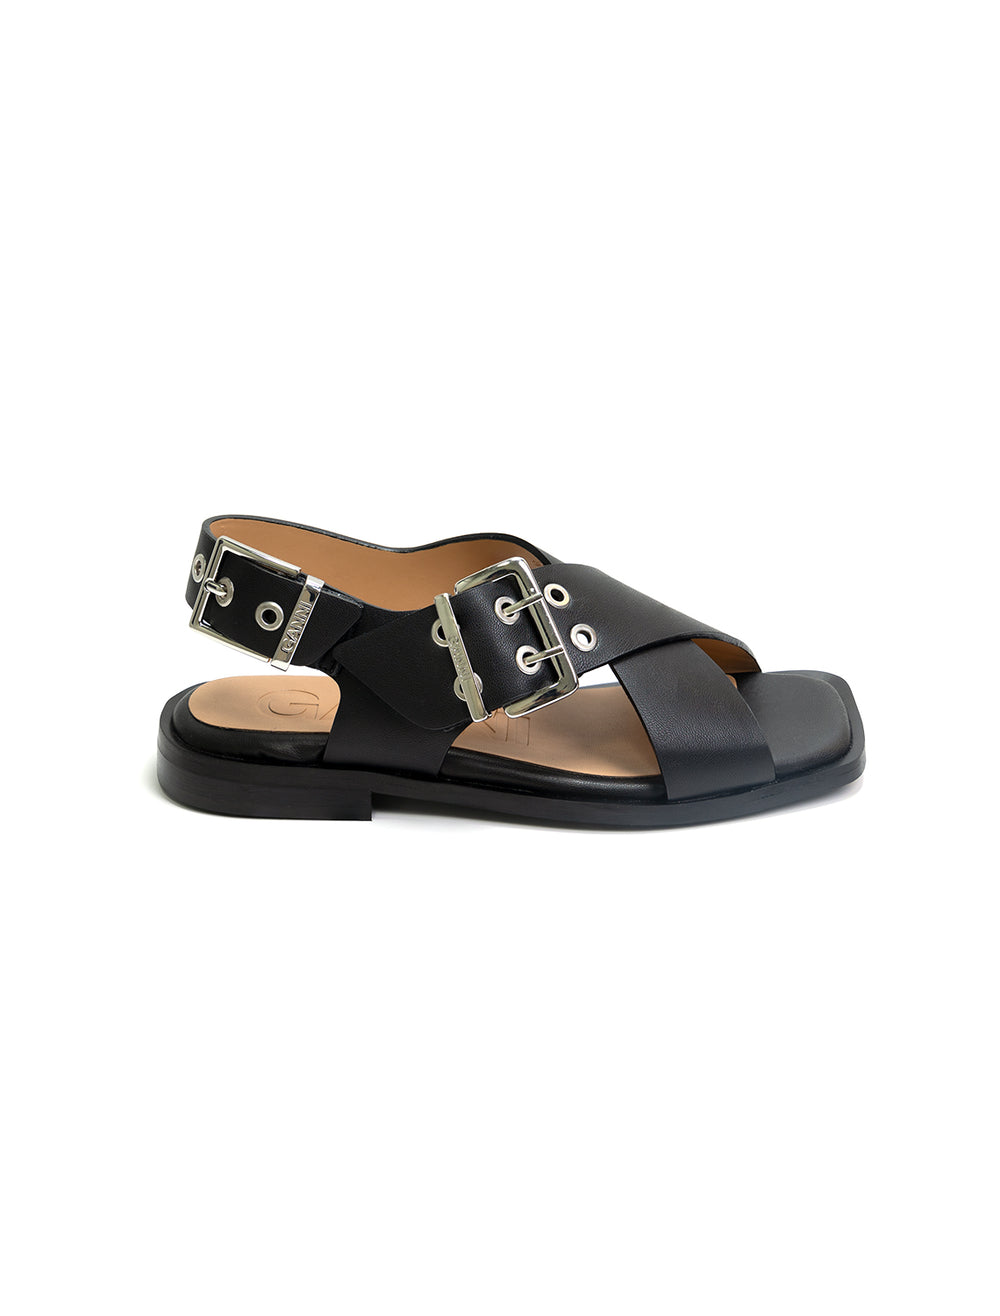 Side view of GANNI's black cross strap buckle sandals.